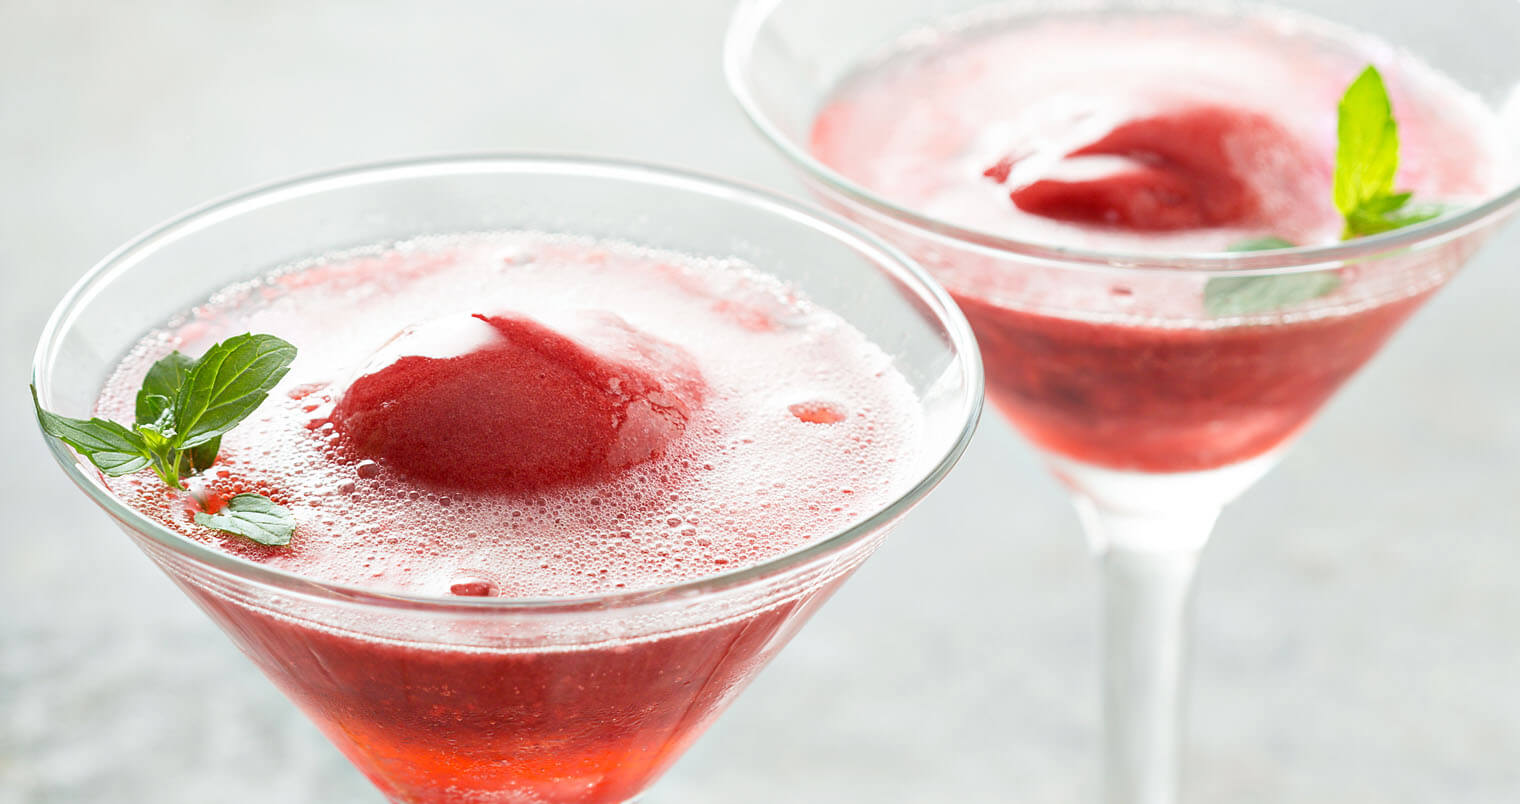 Sparkling rose and raspberry sorbet floats with fresh berries, featured image